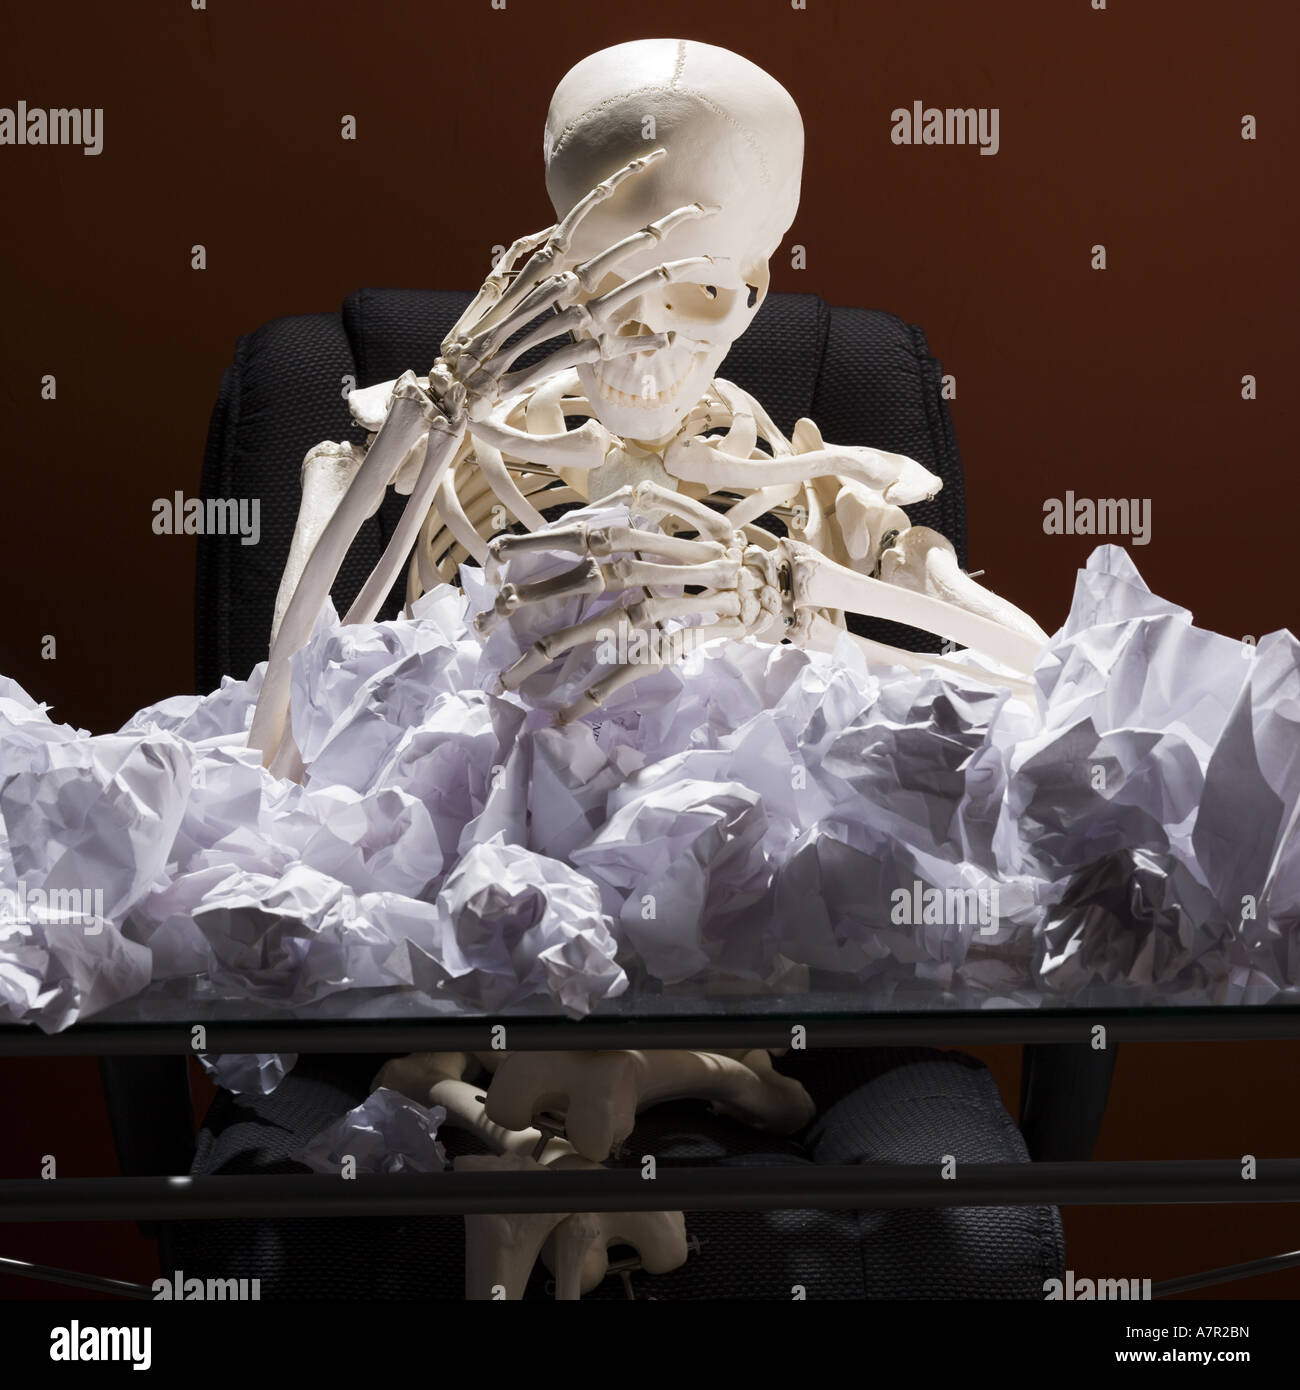 Skeleton Sitting At Desk With Crumpled Papers Stock Photo